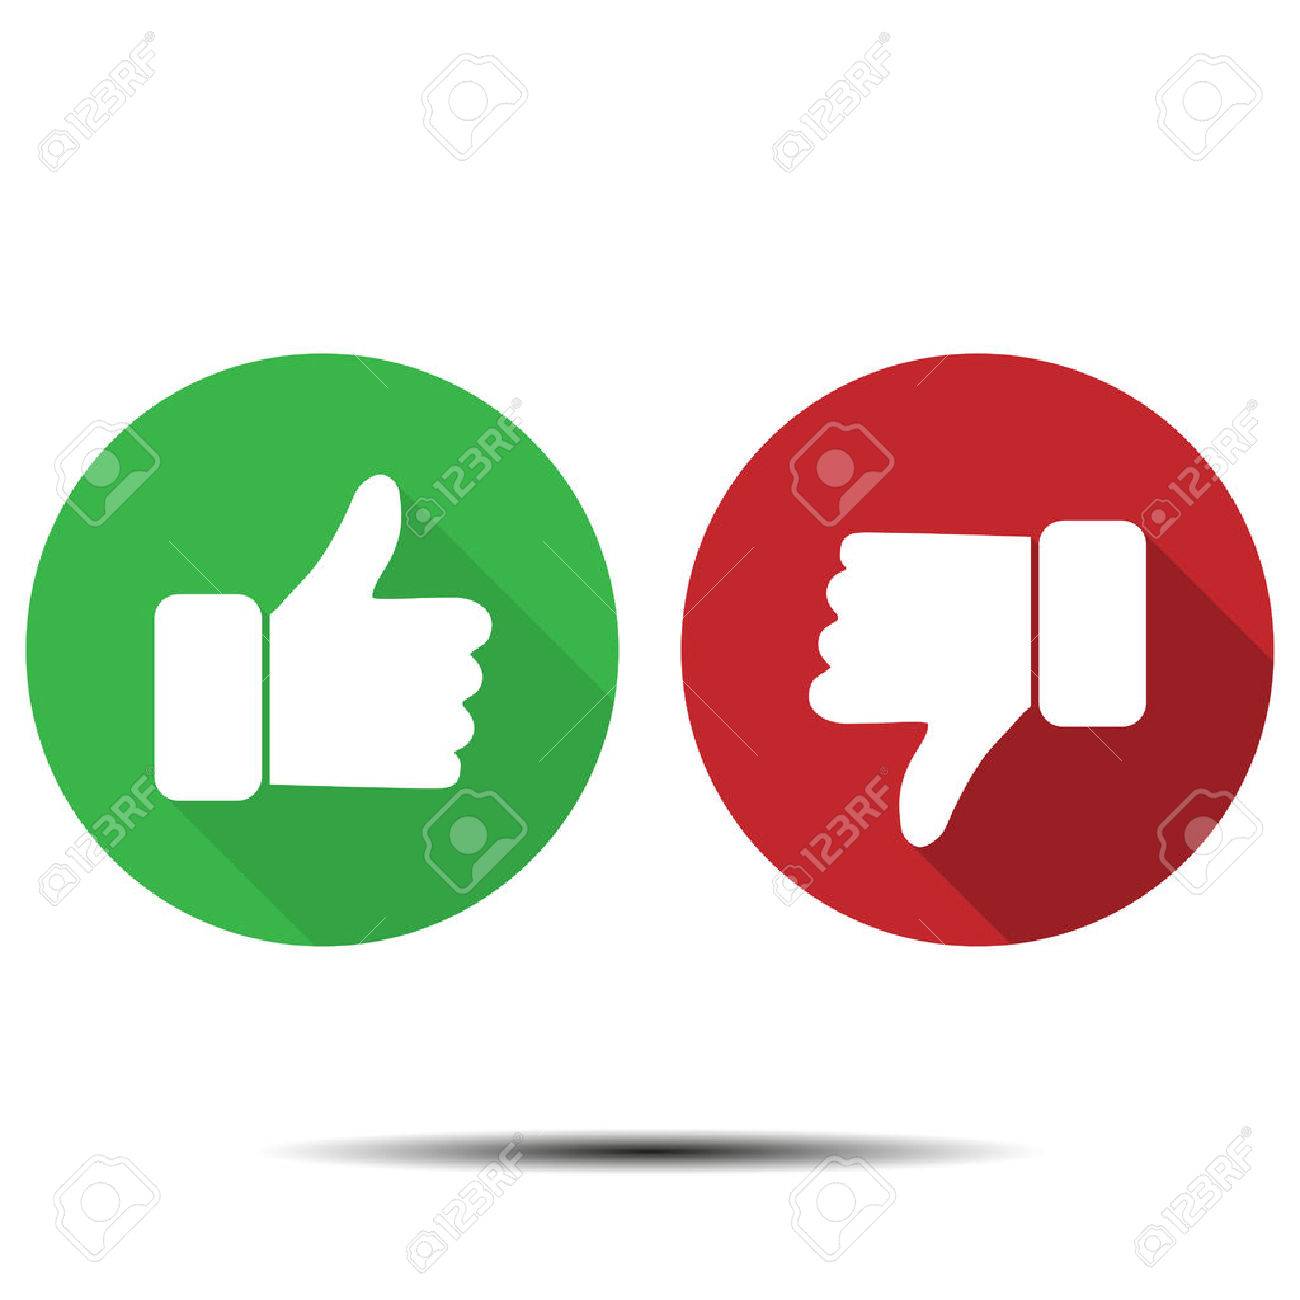 Thumbs Up  Down Icons stock vector. Illustration of looser - 8874807